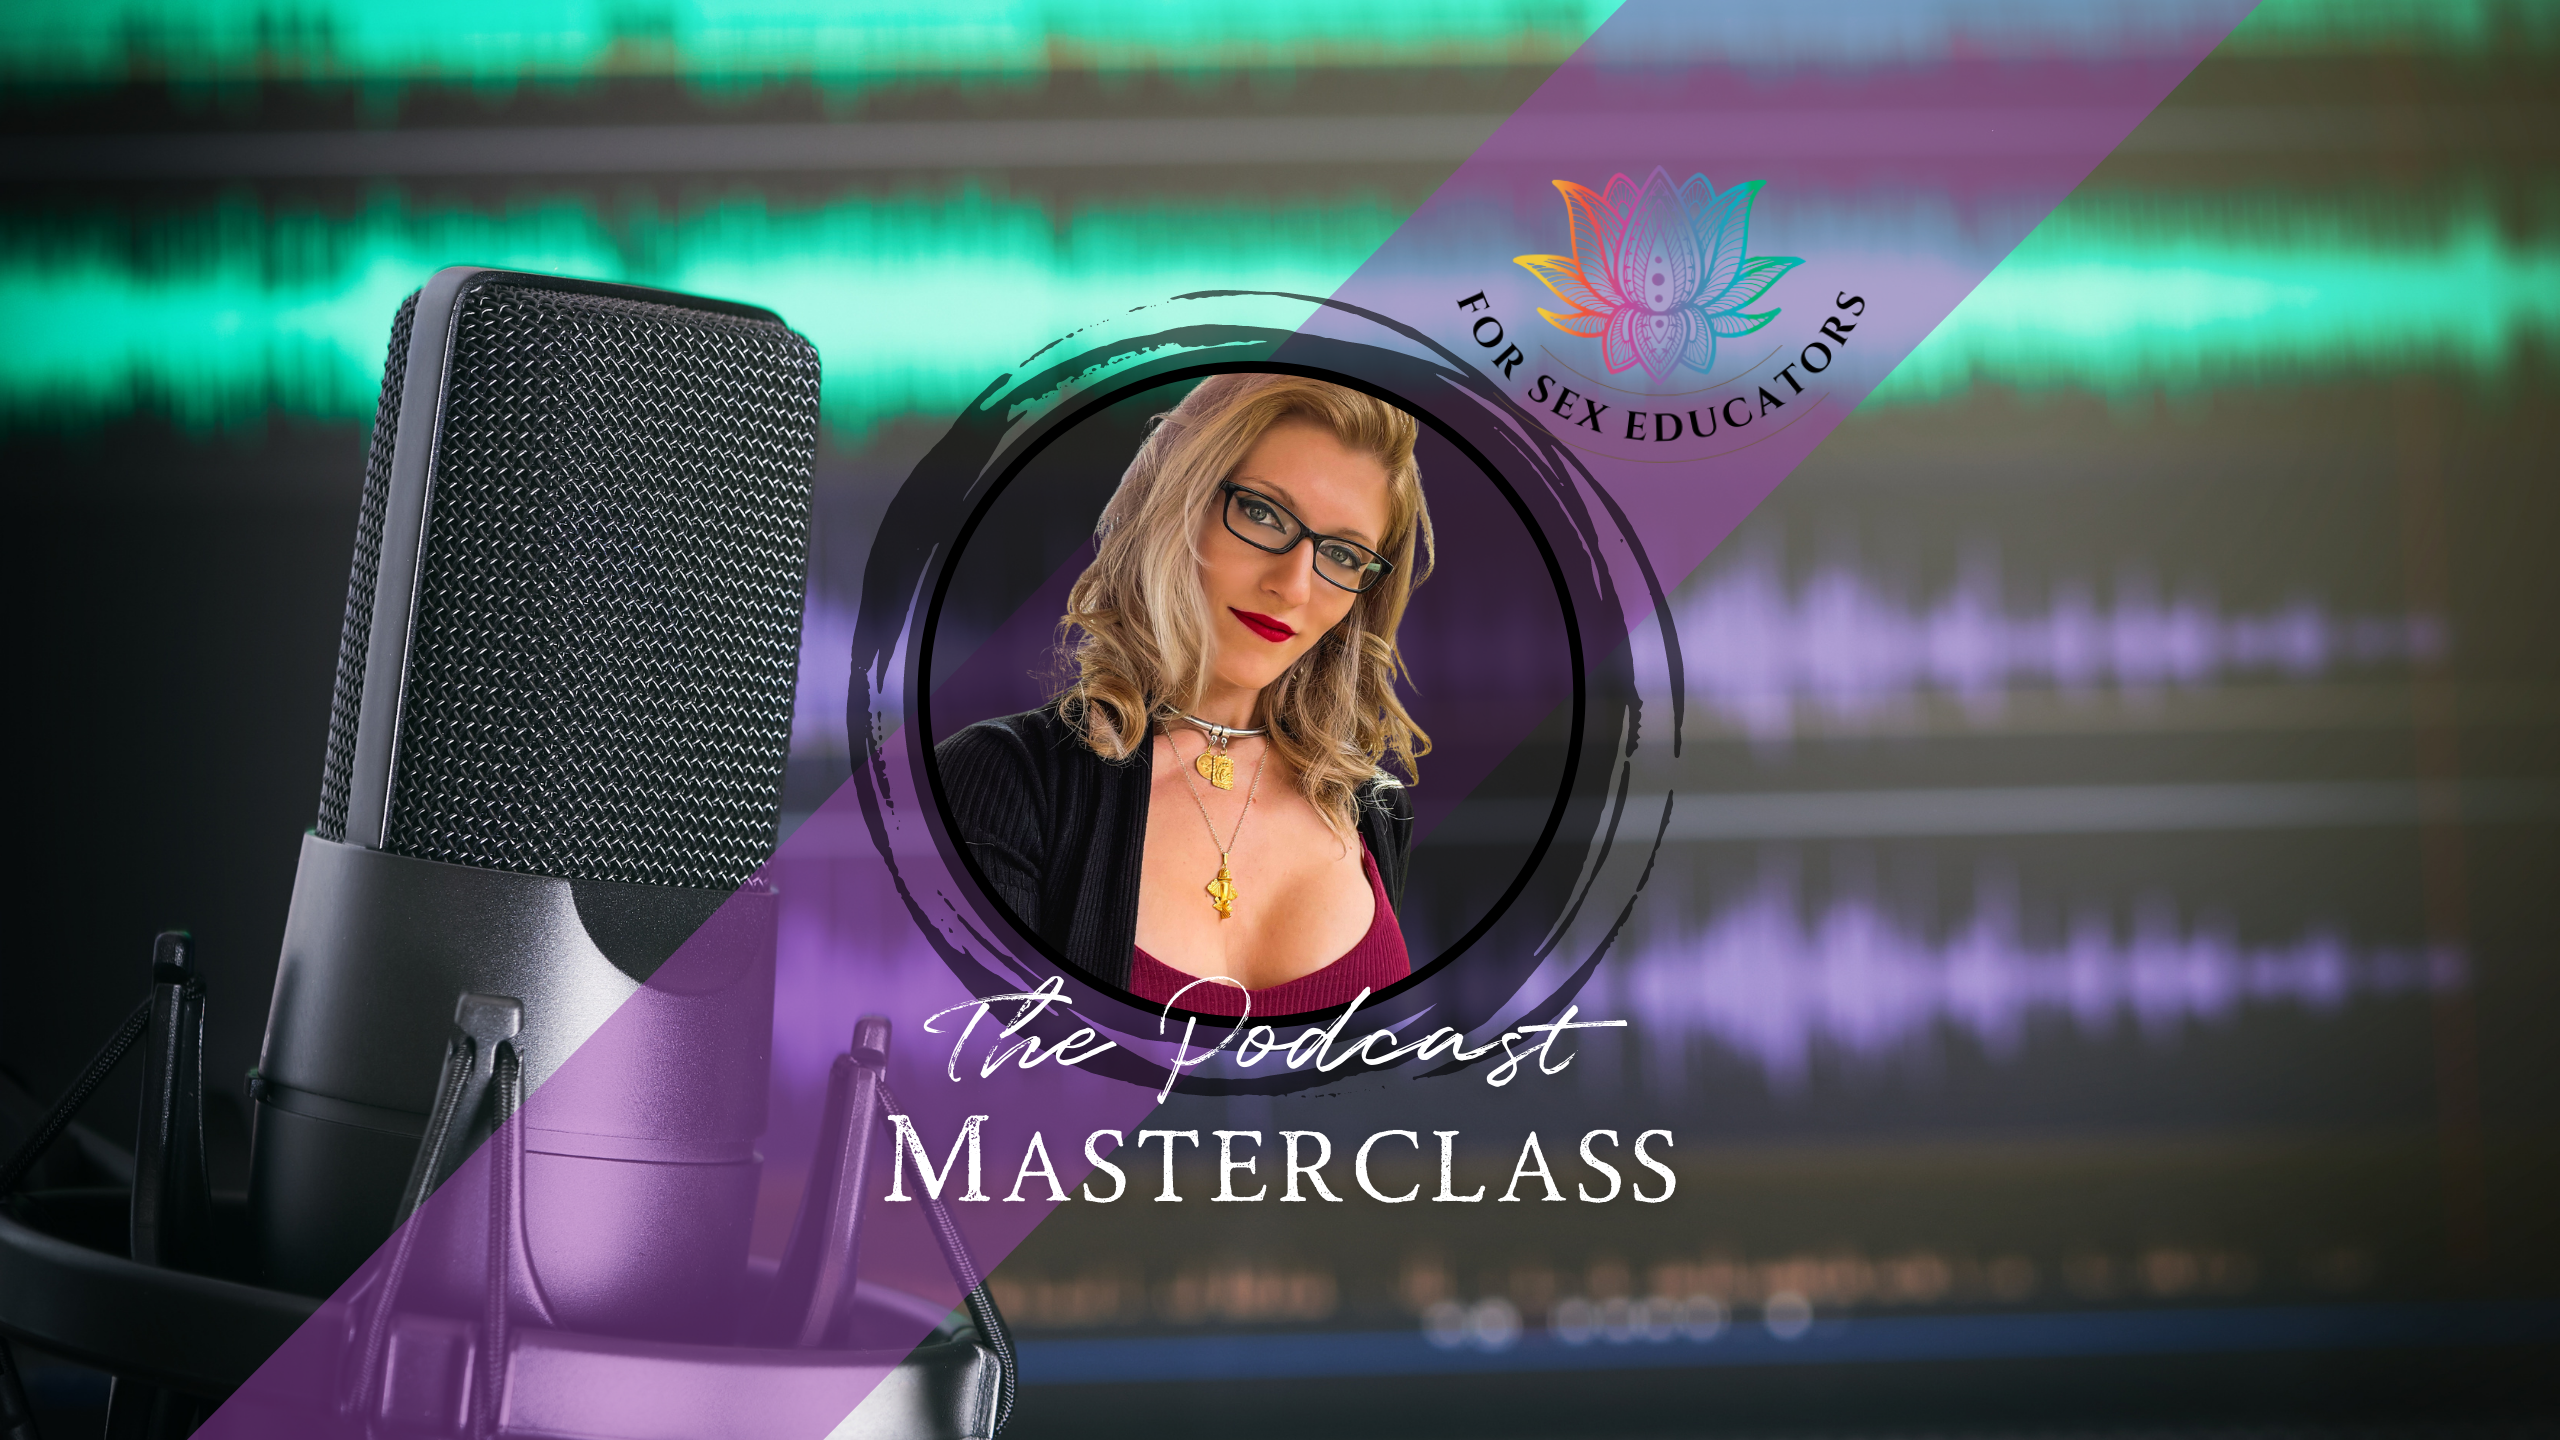 The Podcast Masterclass for Sex Educators, Artists, and Unconventional Creatives